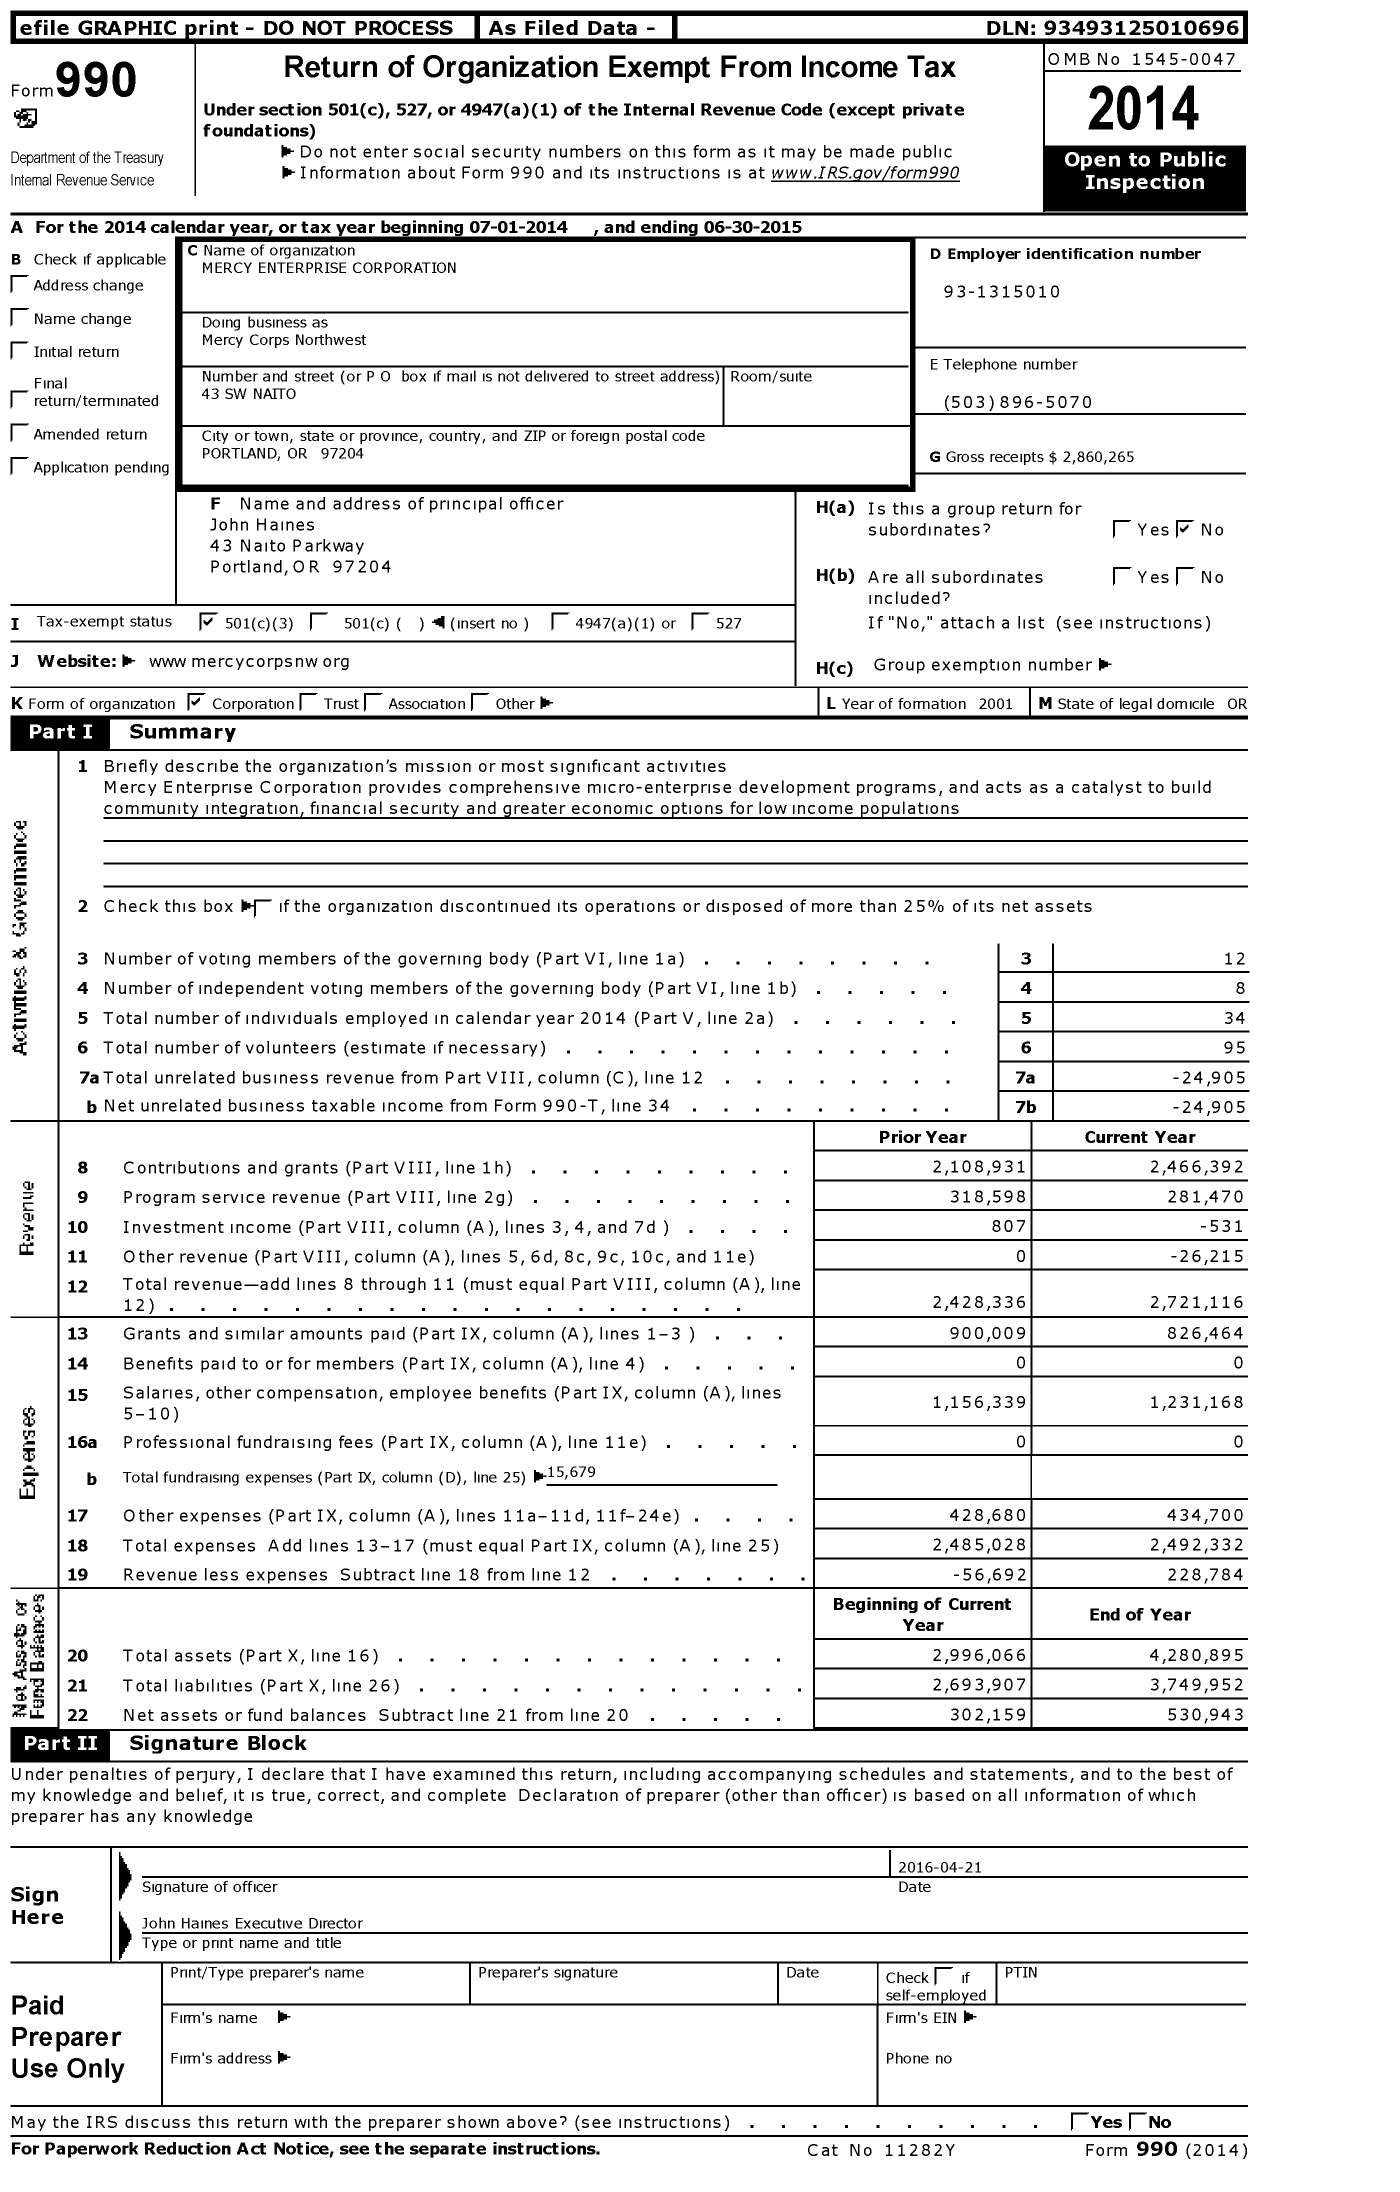 Image of first page of 2014 Form 990 for Mercy Enterprise Corporation